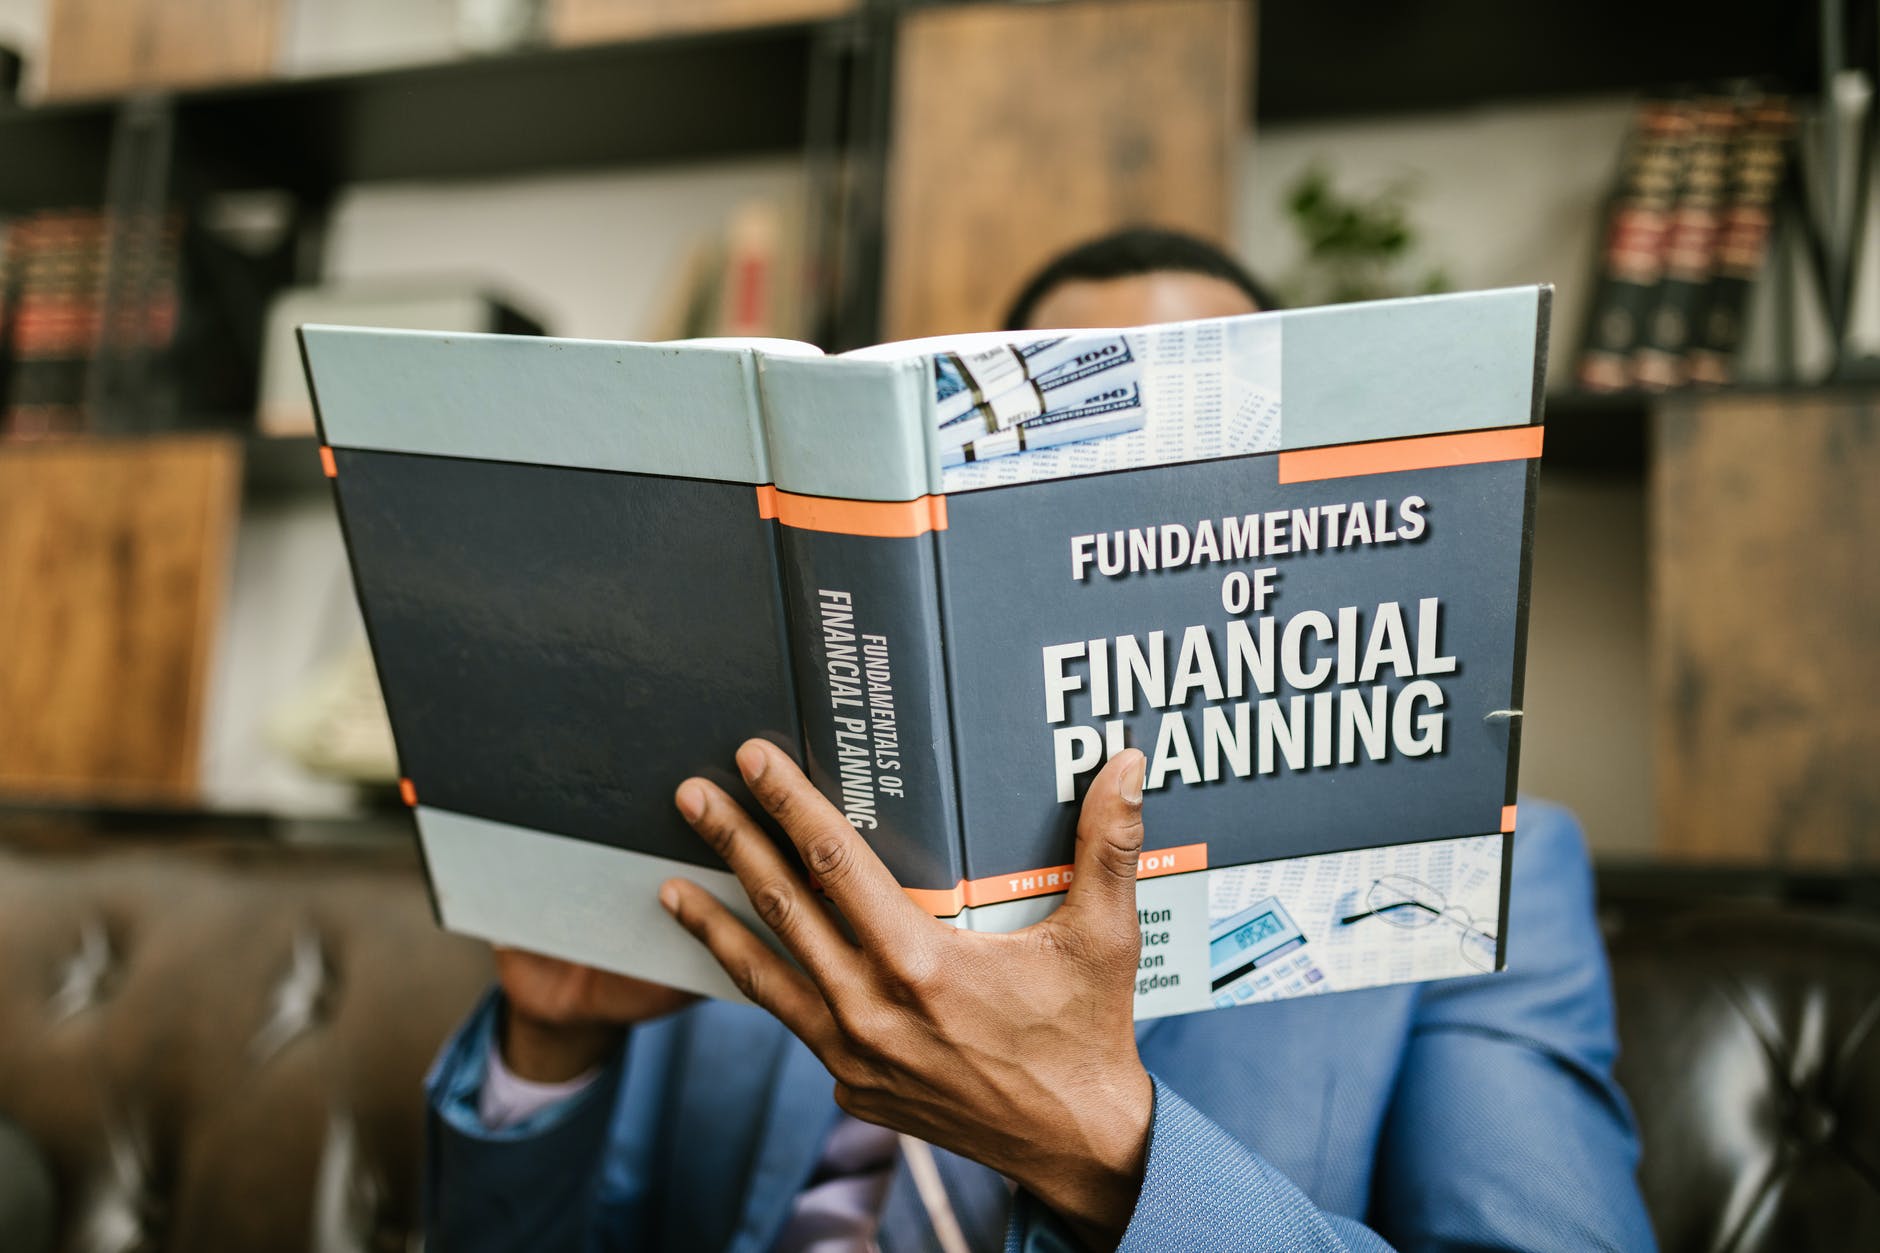 What is the first step in financial planning?